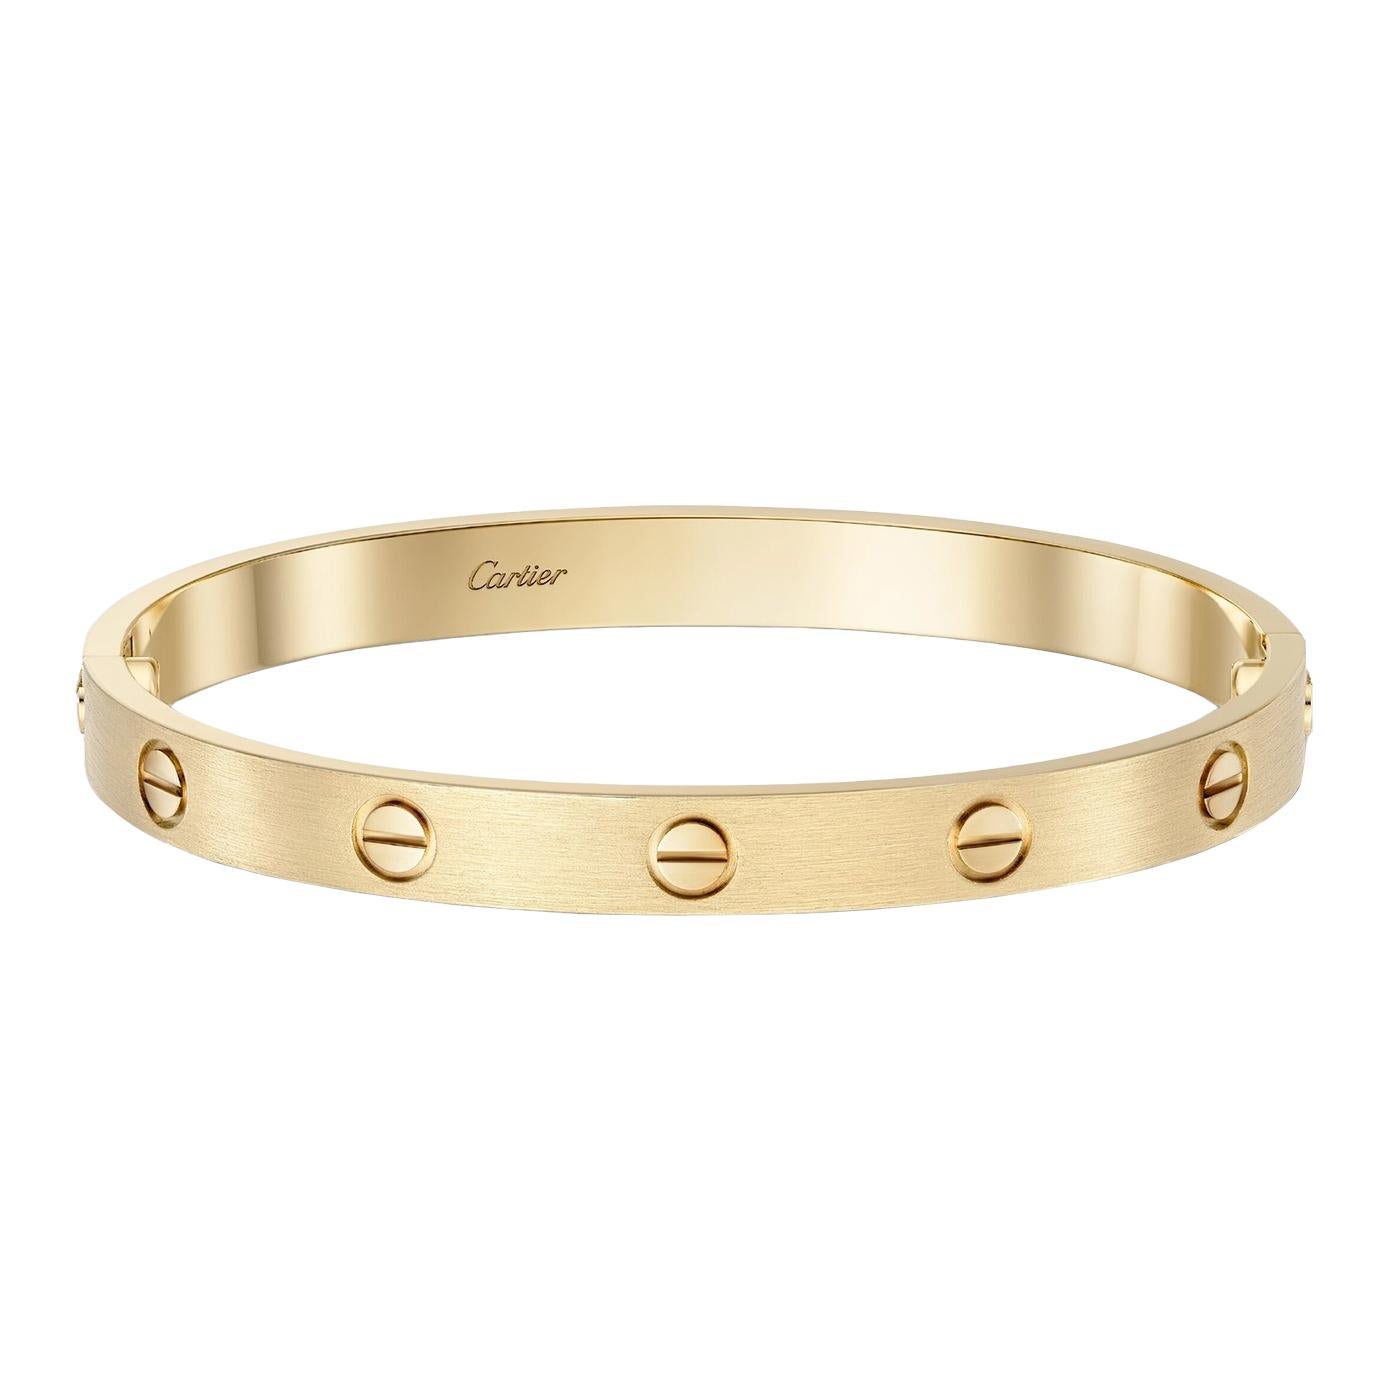 LOVE bracelet, 18K yellow gold (750/1000), brushed finish. Comes with a screwdriver. Width: 6.1 mm. Created in New York in 1969, the LOVE bracelet is a jewelry design icon: a close-fitting, oval bracelet composed of two rigid arcs that is worn on